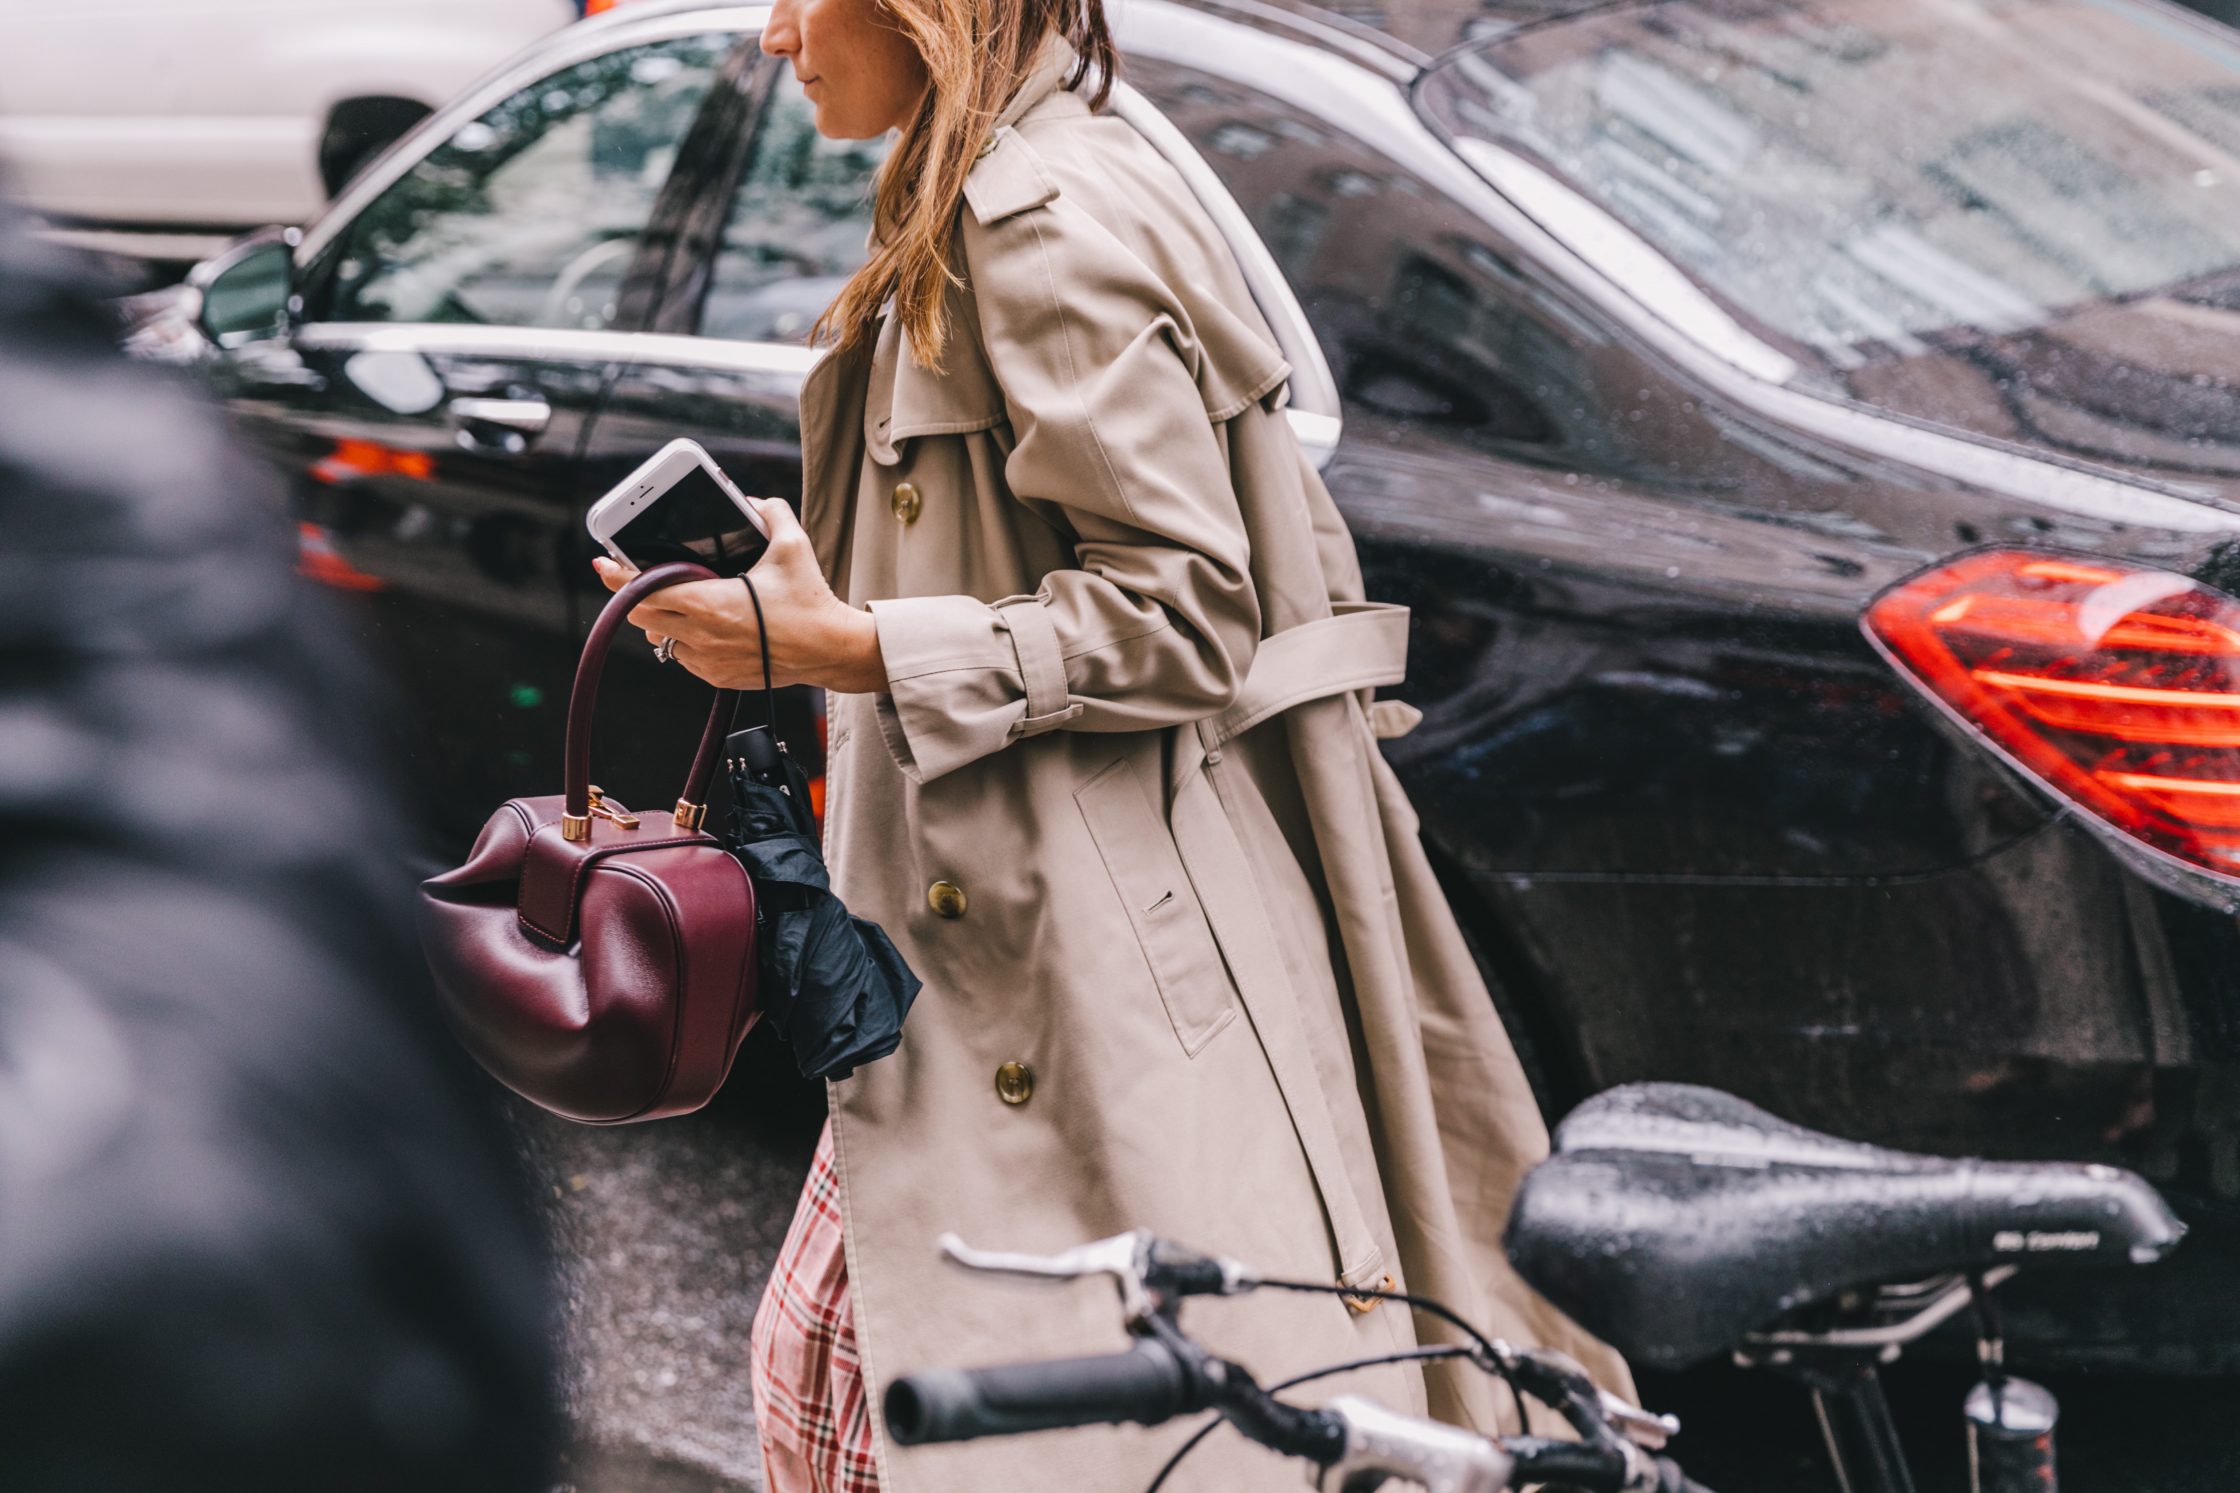 Spring Summer 2019 Street Style from New York Fashion Week by Collage Vintage